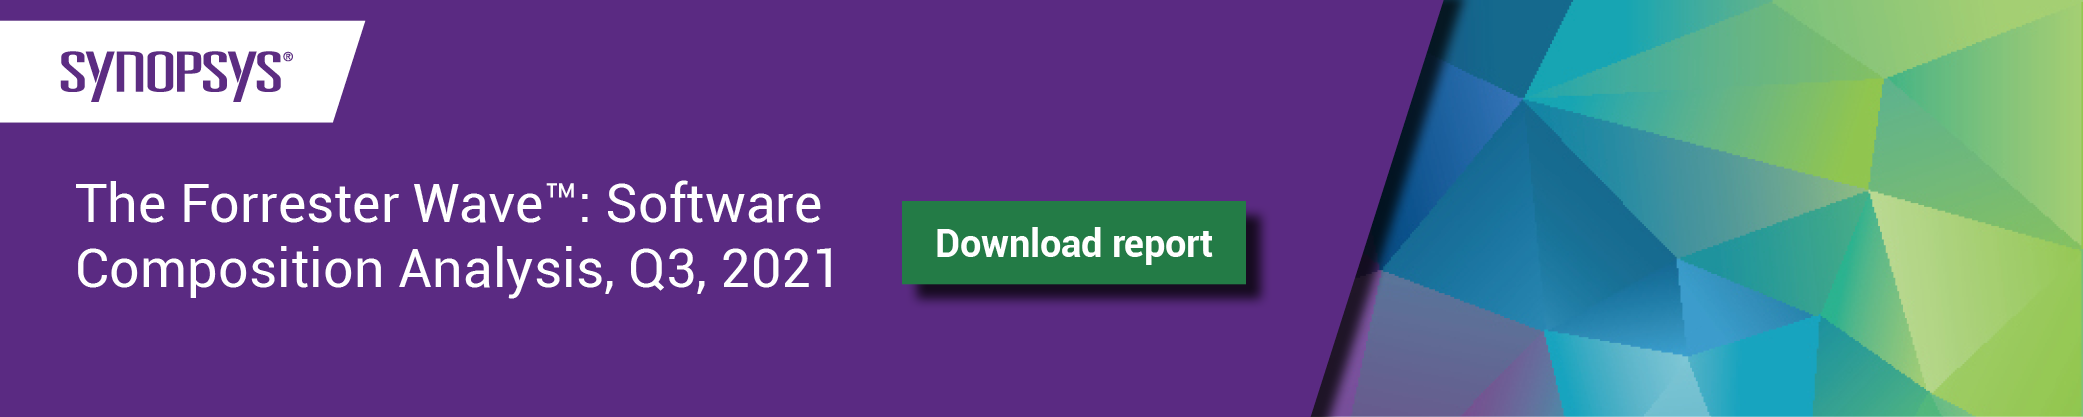 Download The Forrester Wave: Software Composition Analysis, Q3, 2021 | Synopsys